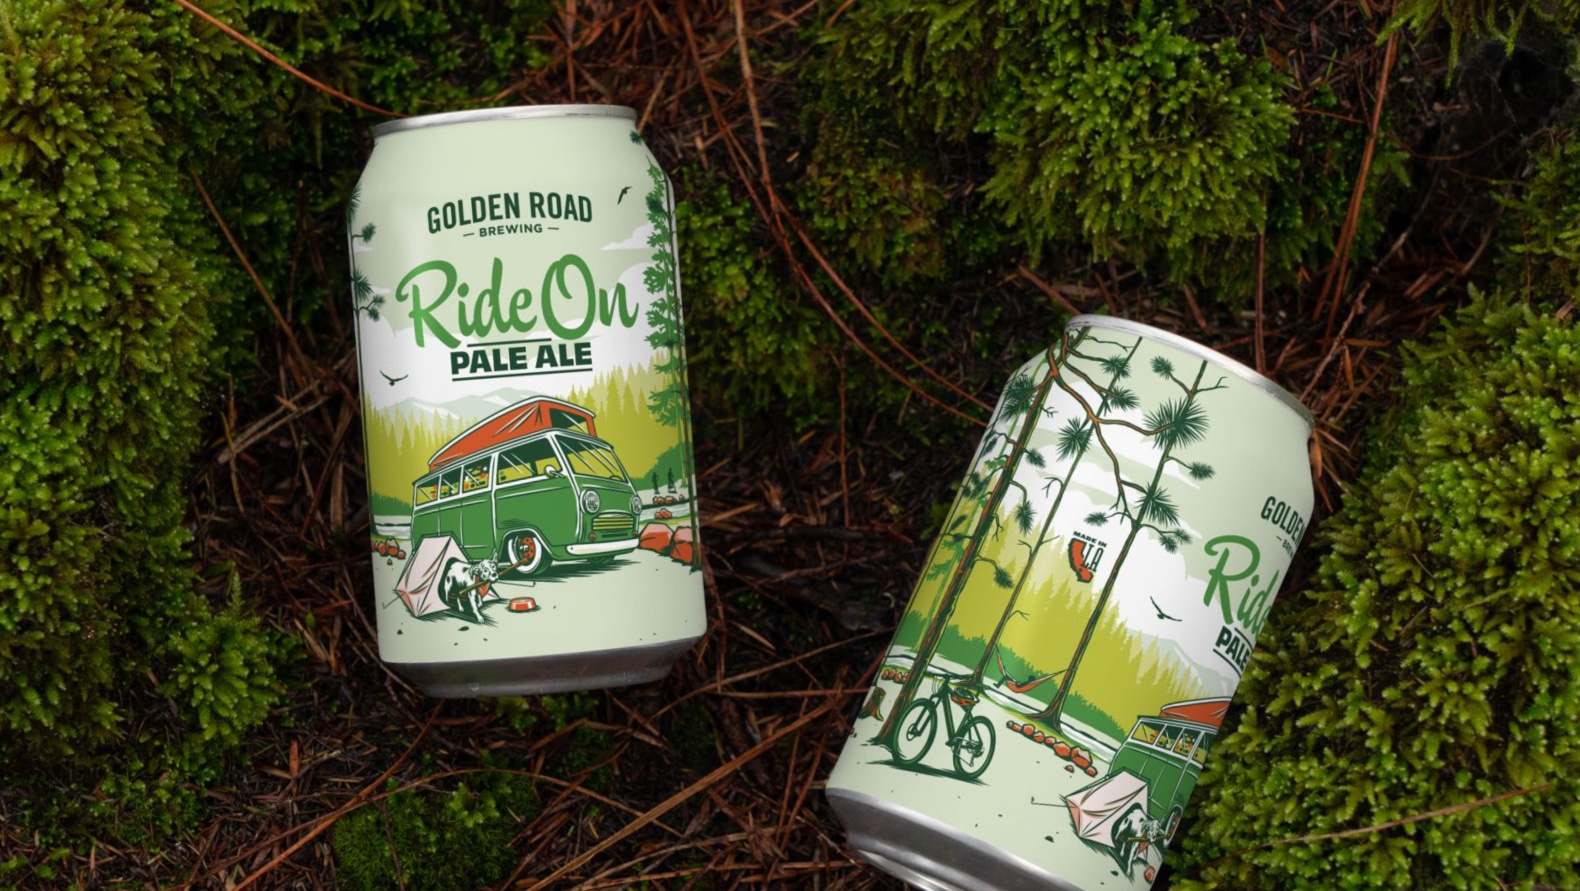 Two Golden Road beer cans sit in a beautiful forest bed of moss and pine needles. The cans are light green with a charming illustration of a vintage green van parked on the shore of a lake in the forest, camping. A cute dog is seen coming out of its own small “pup-tent” in the foreground, carrying a stick. The beer name is Ride On Pale Ale, which is seen in playful kelly green script and dark green block letters.